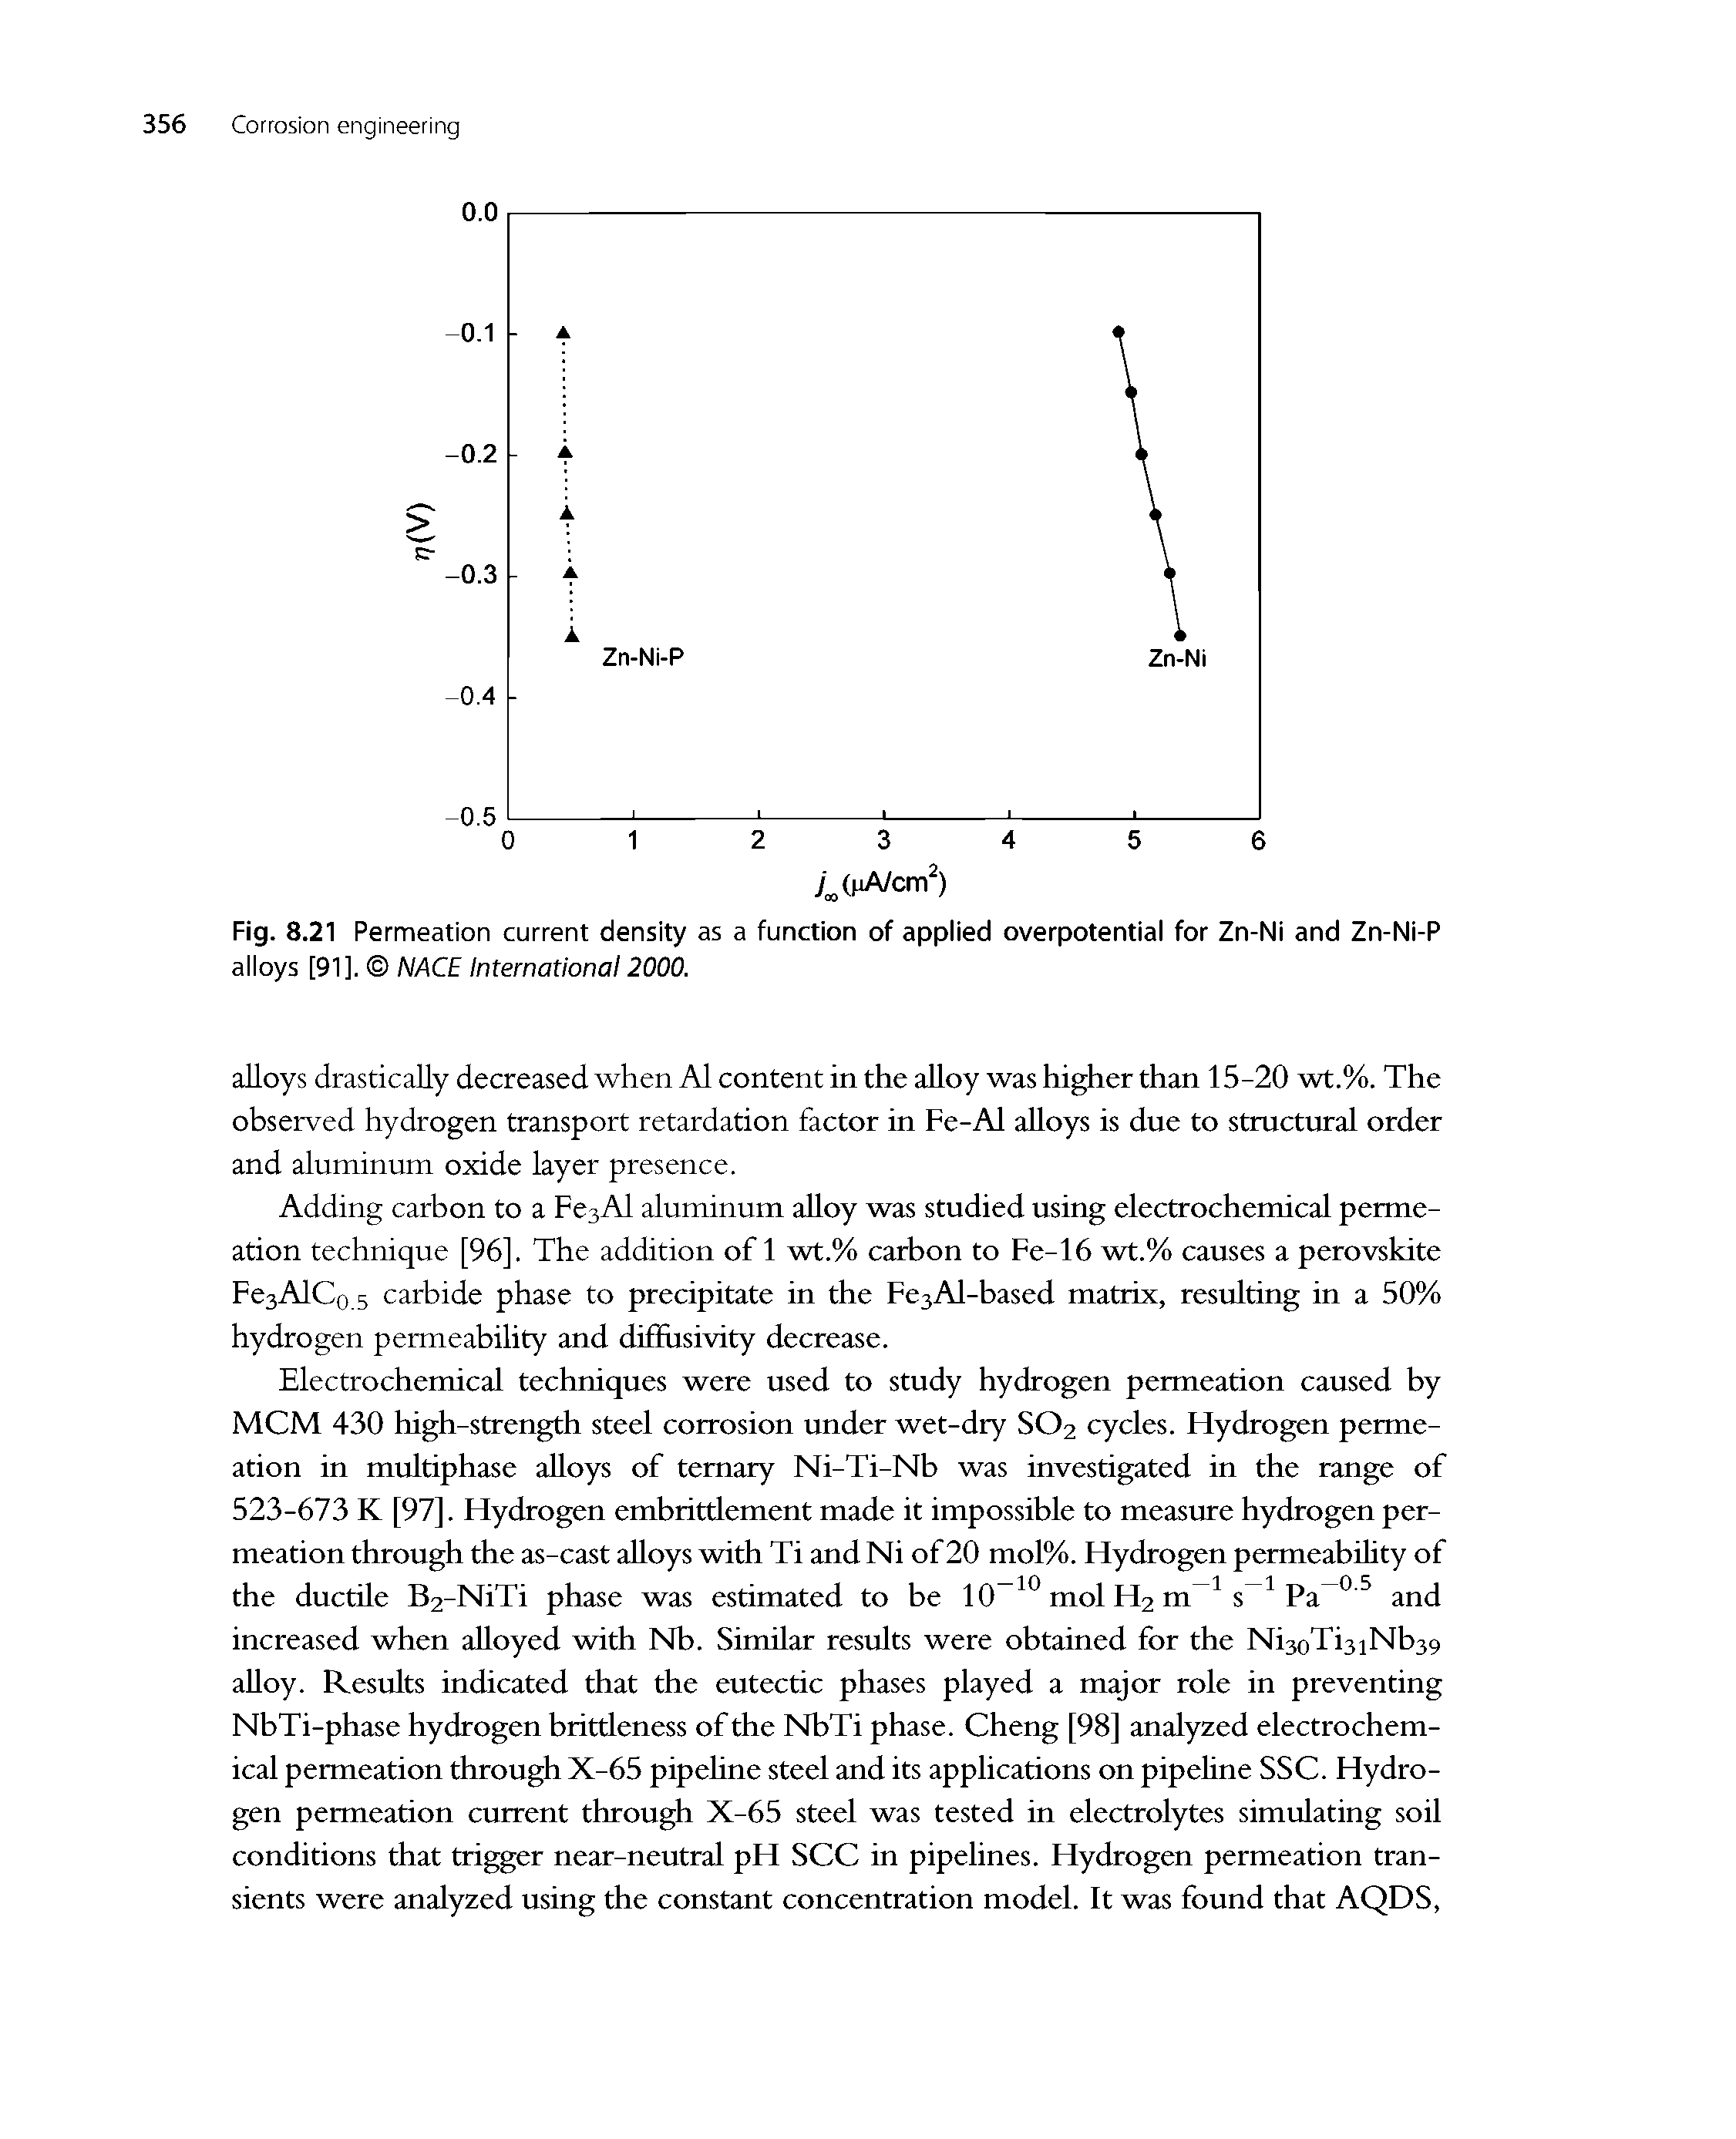 Fig. 8.21 Permeation current density as a function of applied overpotential for Zn-Ni and Zn-Ni-P alloys [91]. NACE International 2000.